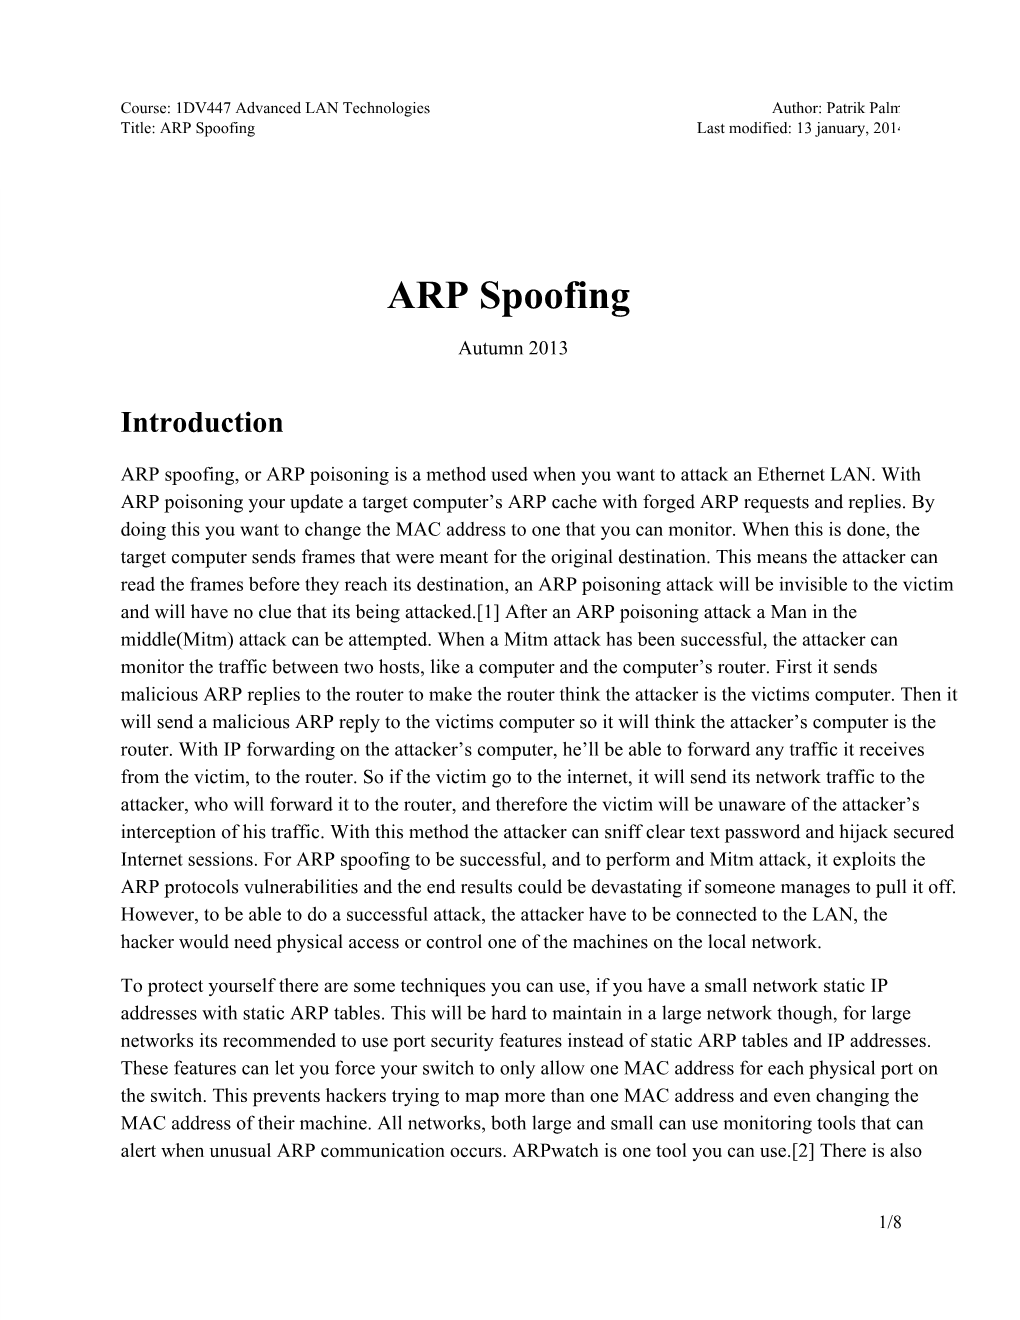 ARP Spoofing Last Modified: 13 January, 2014